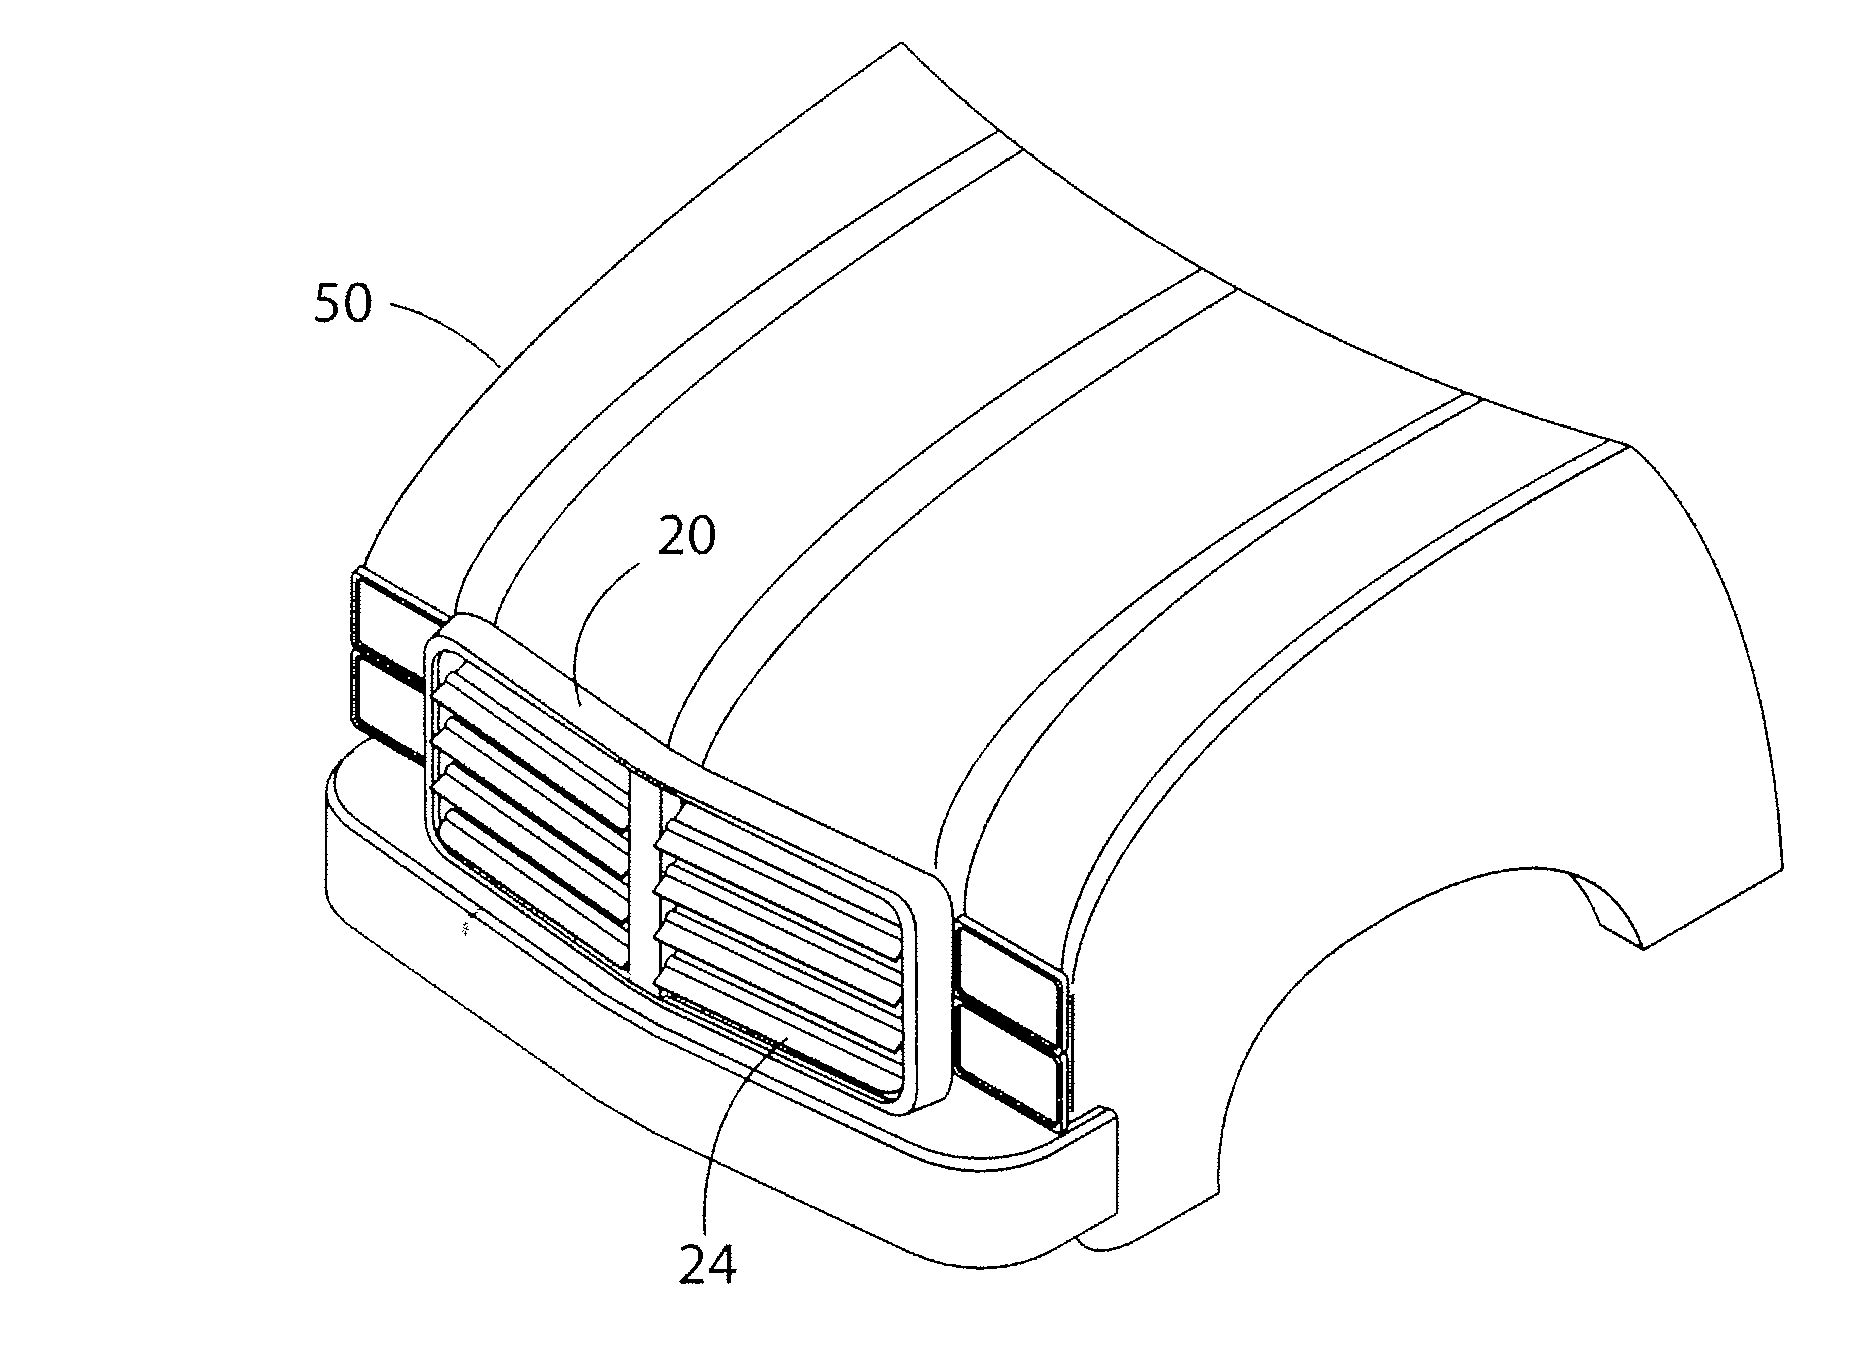 Variable vent system integrated into a vehicle front end grill